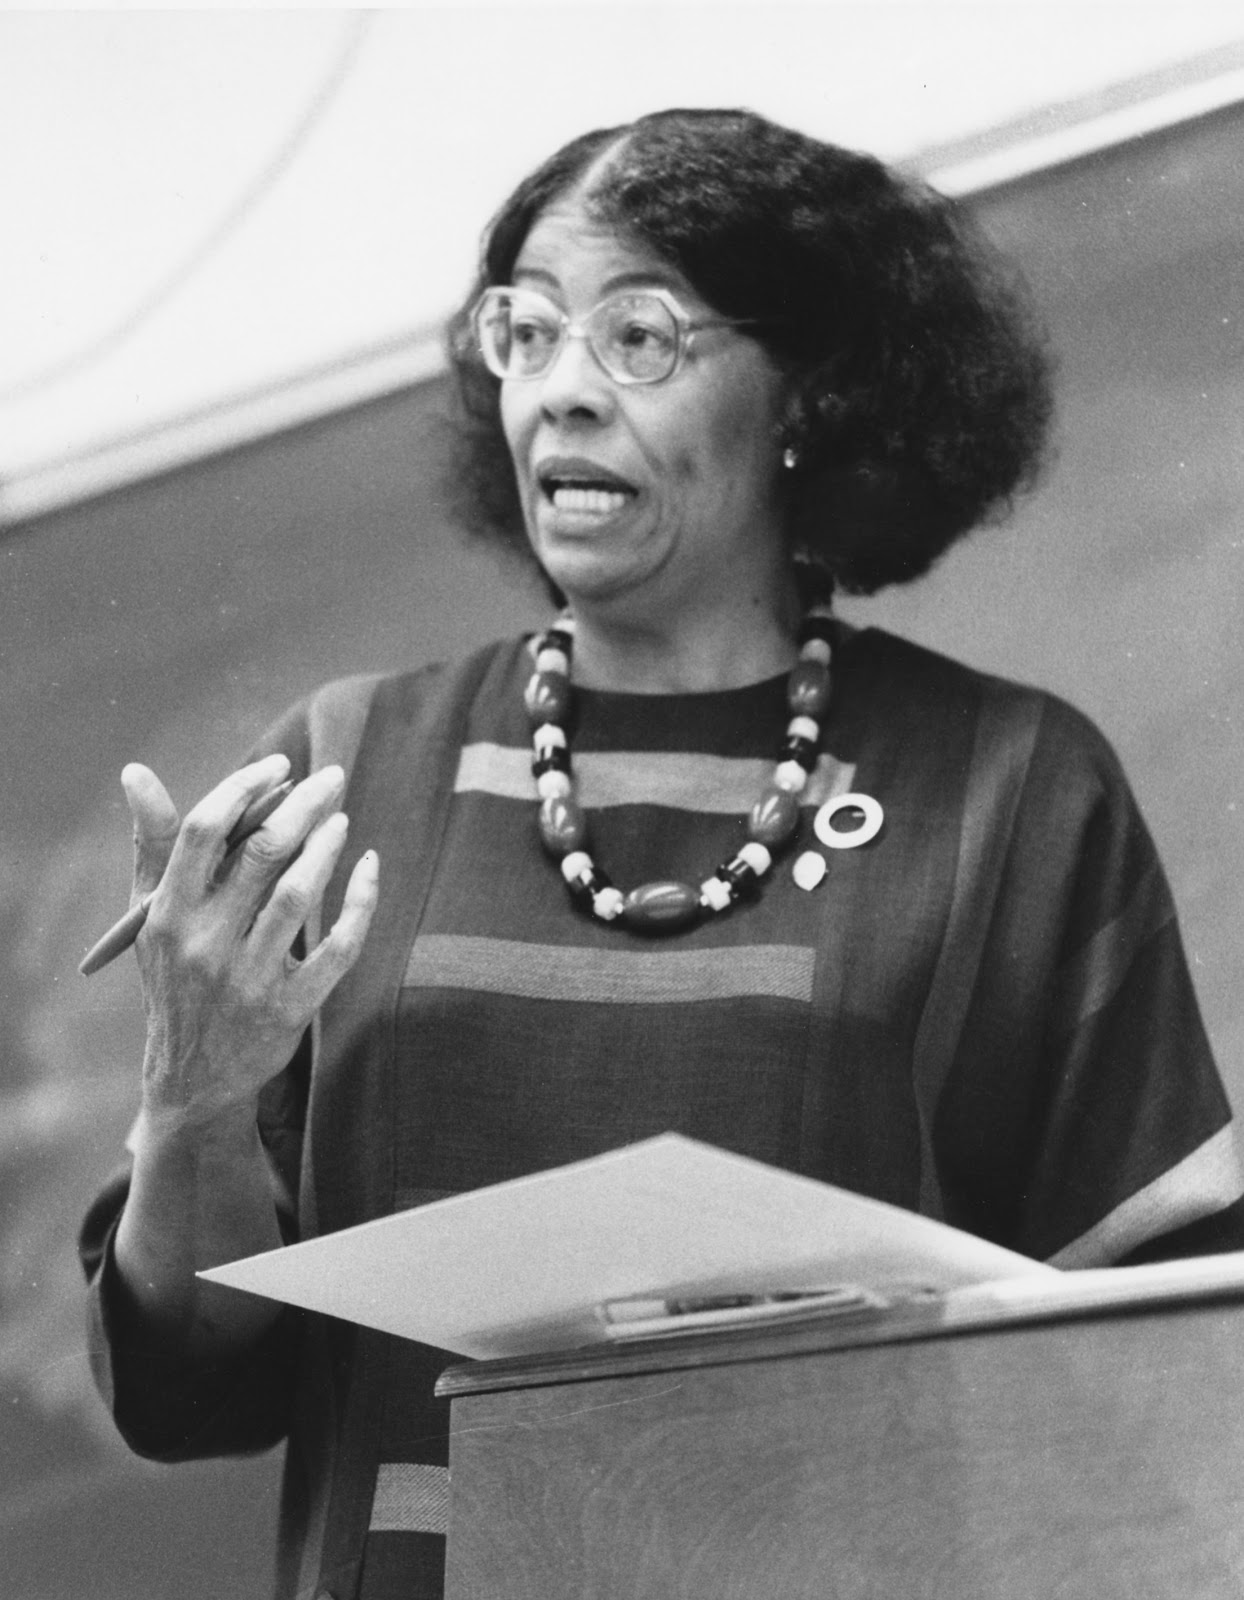 Wilkinson became the first full-time female African-American faculty member at UK. Photo courtesy of UK Special Collections.